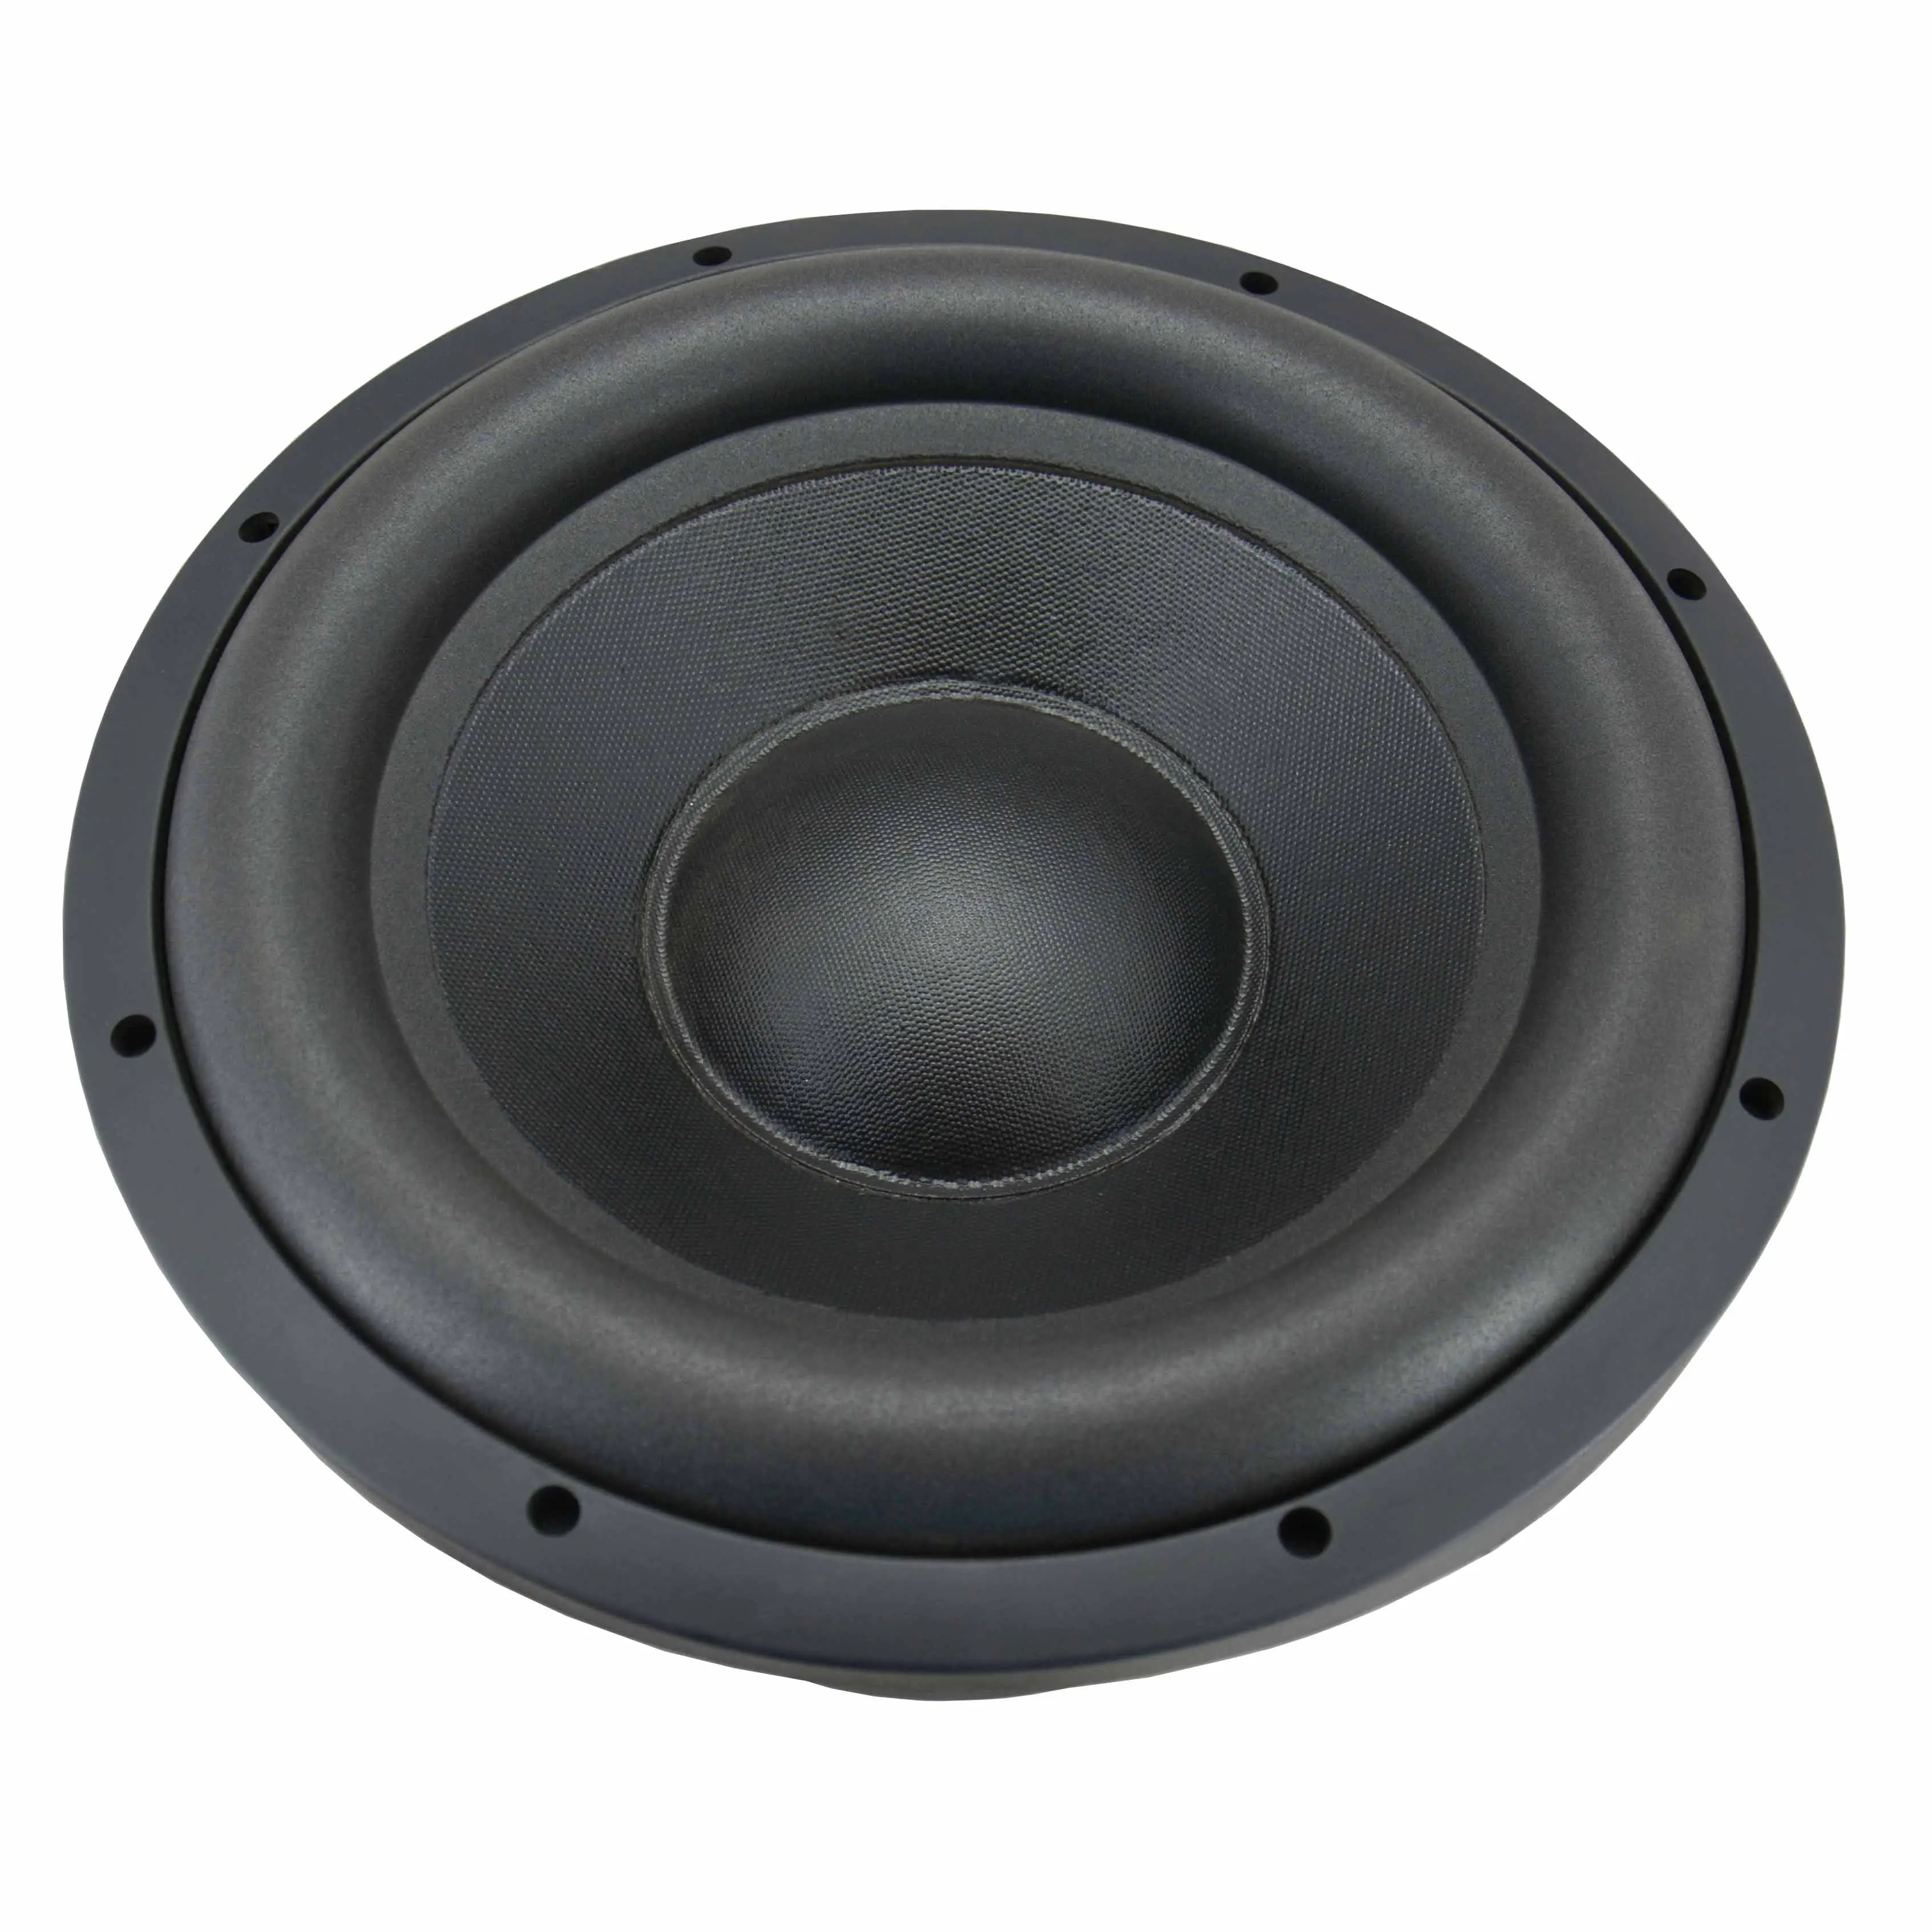 Factory OEM Audio Subwoofer Powerful Speaker Parts 10 12 15 Inch Car Big Power Sub Woofer Speakers 3000W RMS CT-1203